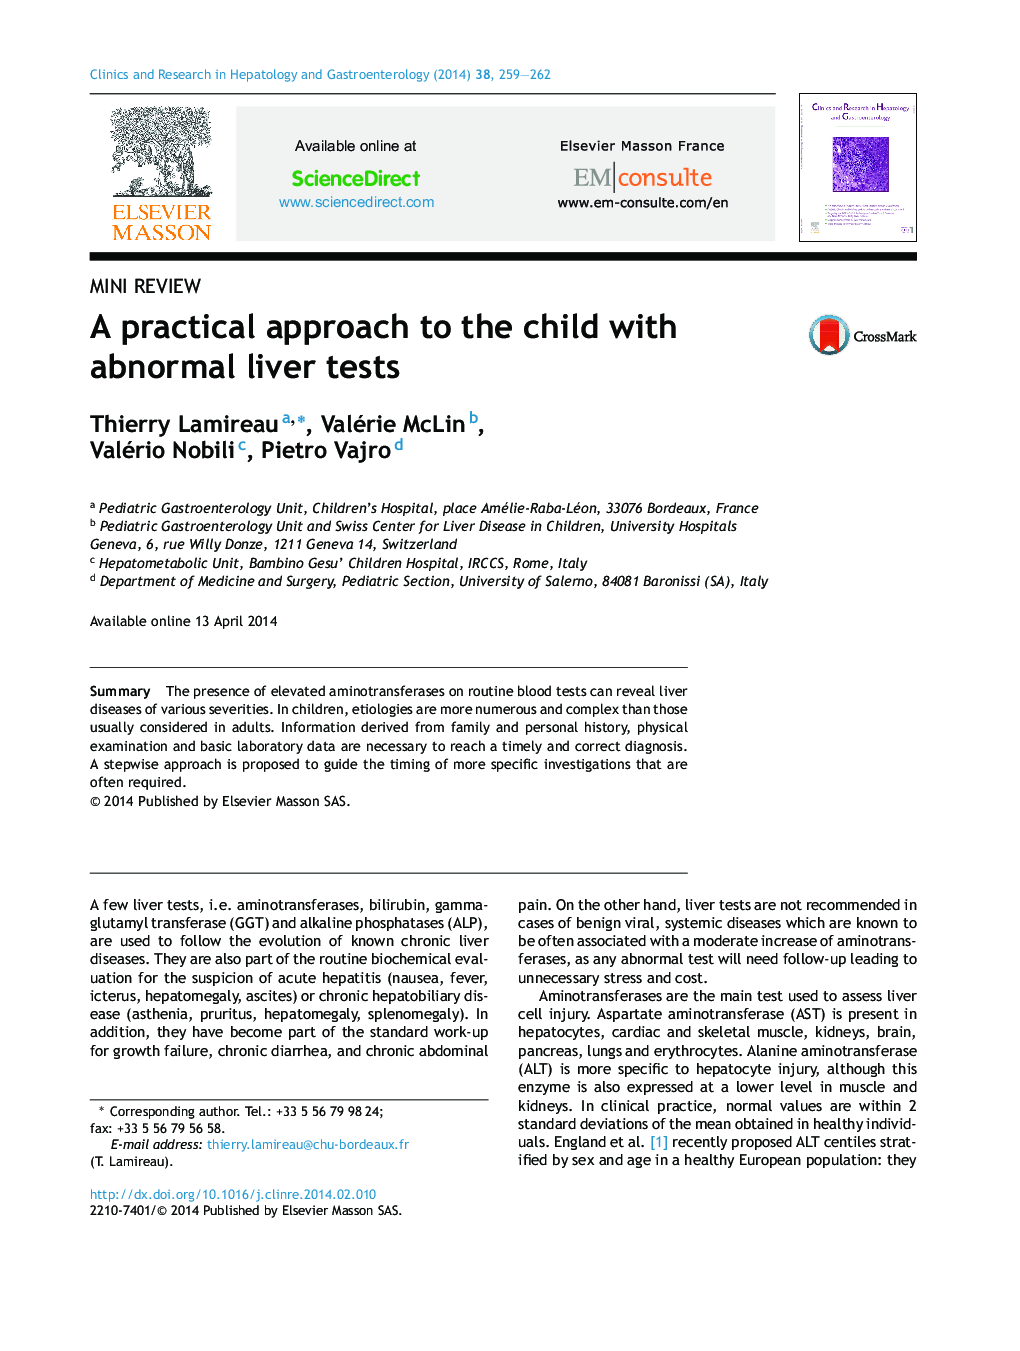 A practical approach to the child with abnormal liver tests